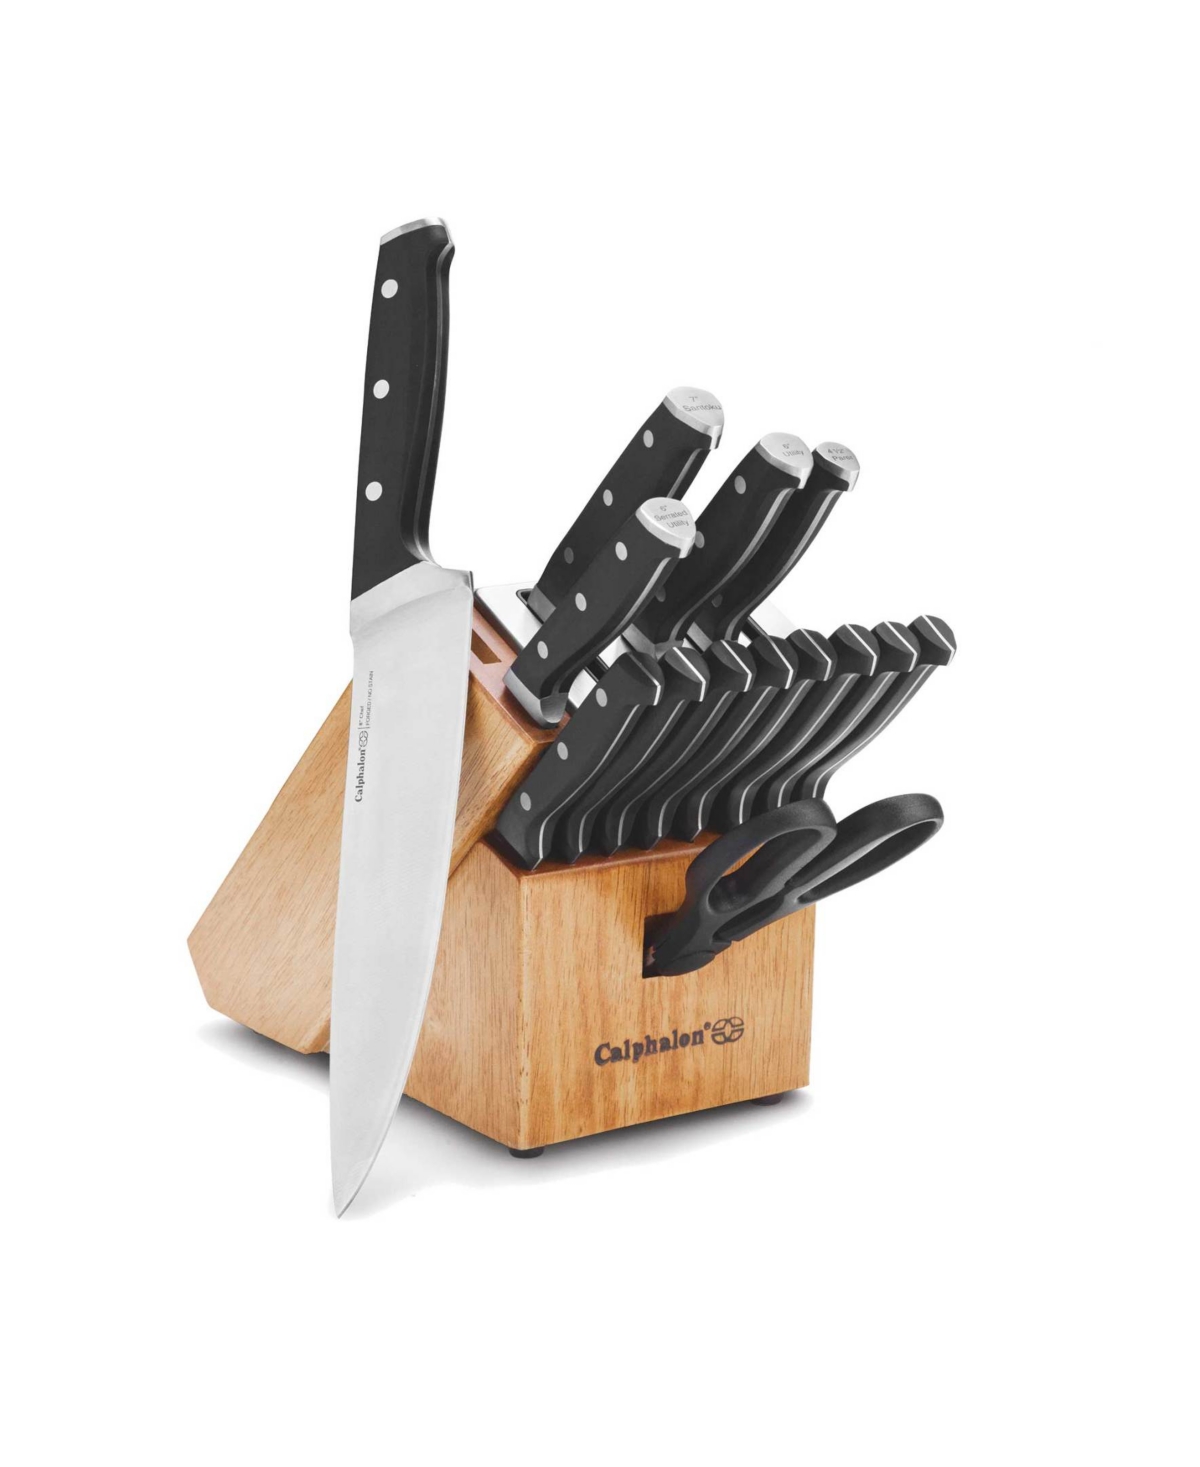 Calphalon Classic Stainless Steel Microbial-resistant Self-sharpening 15-piece Cutlery Set In Black